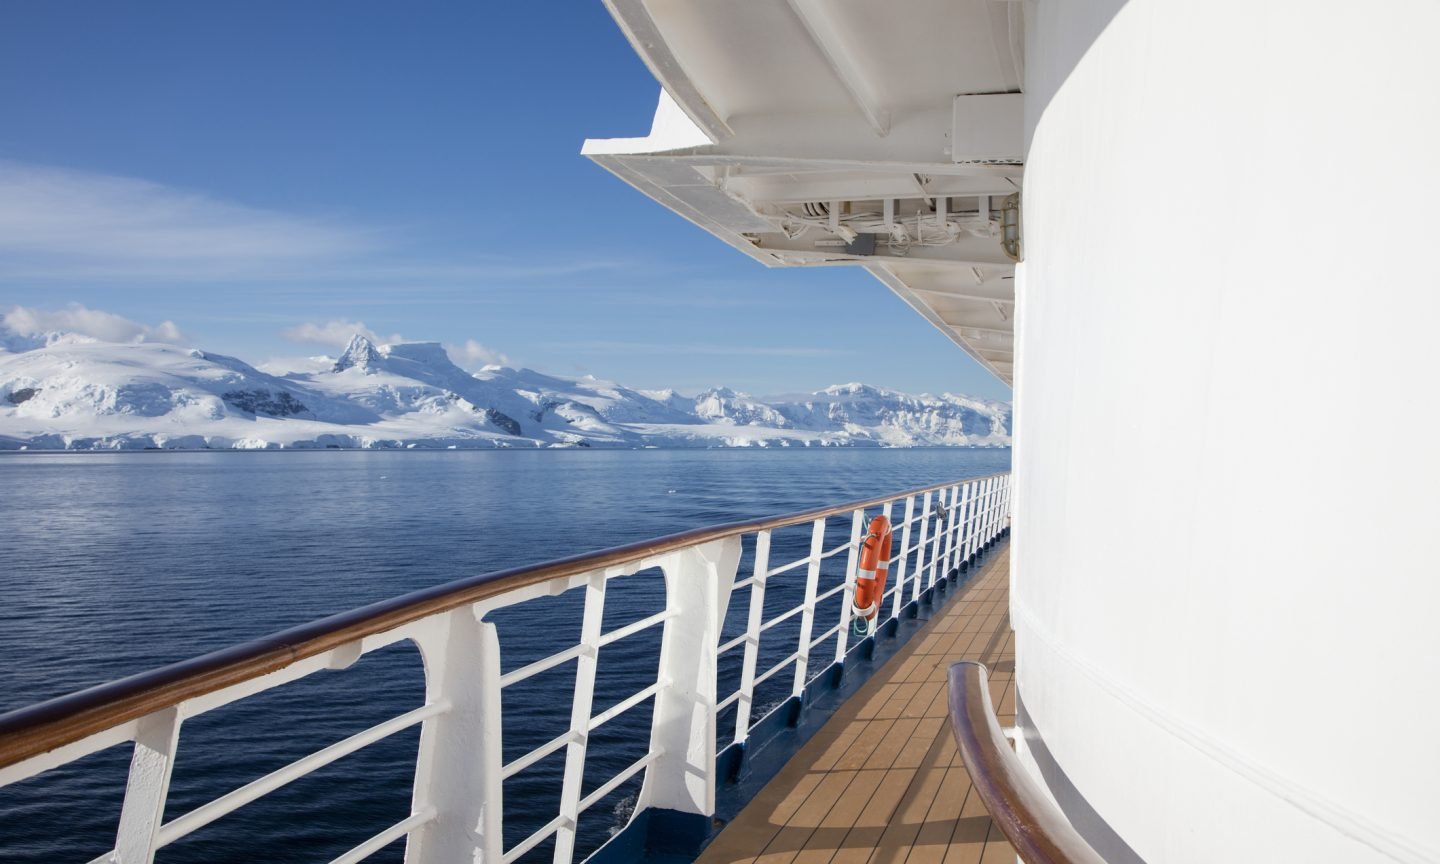 Cruise Journey Insurance coverage: Is It Definitely worth the Price? – NerdWallet